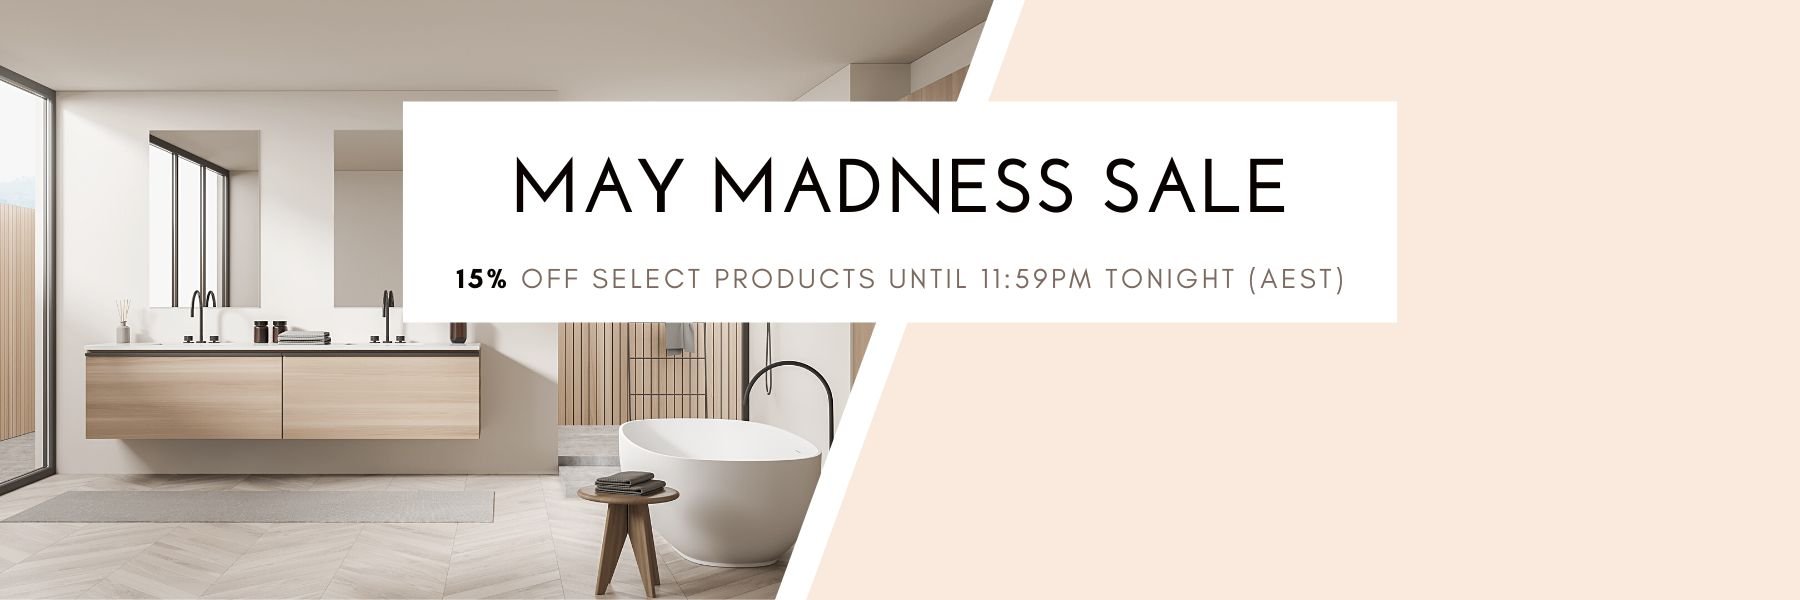 15% off select products during the May Madness Sale at Plyco online